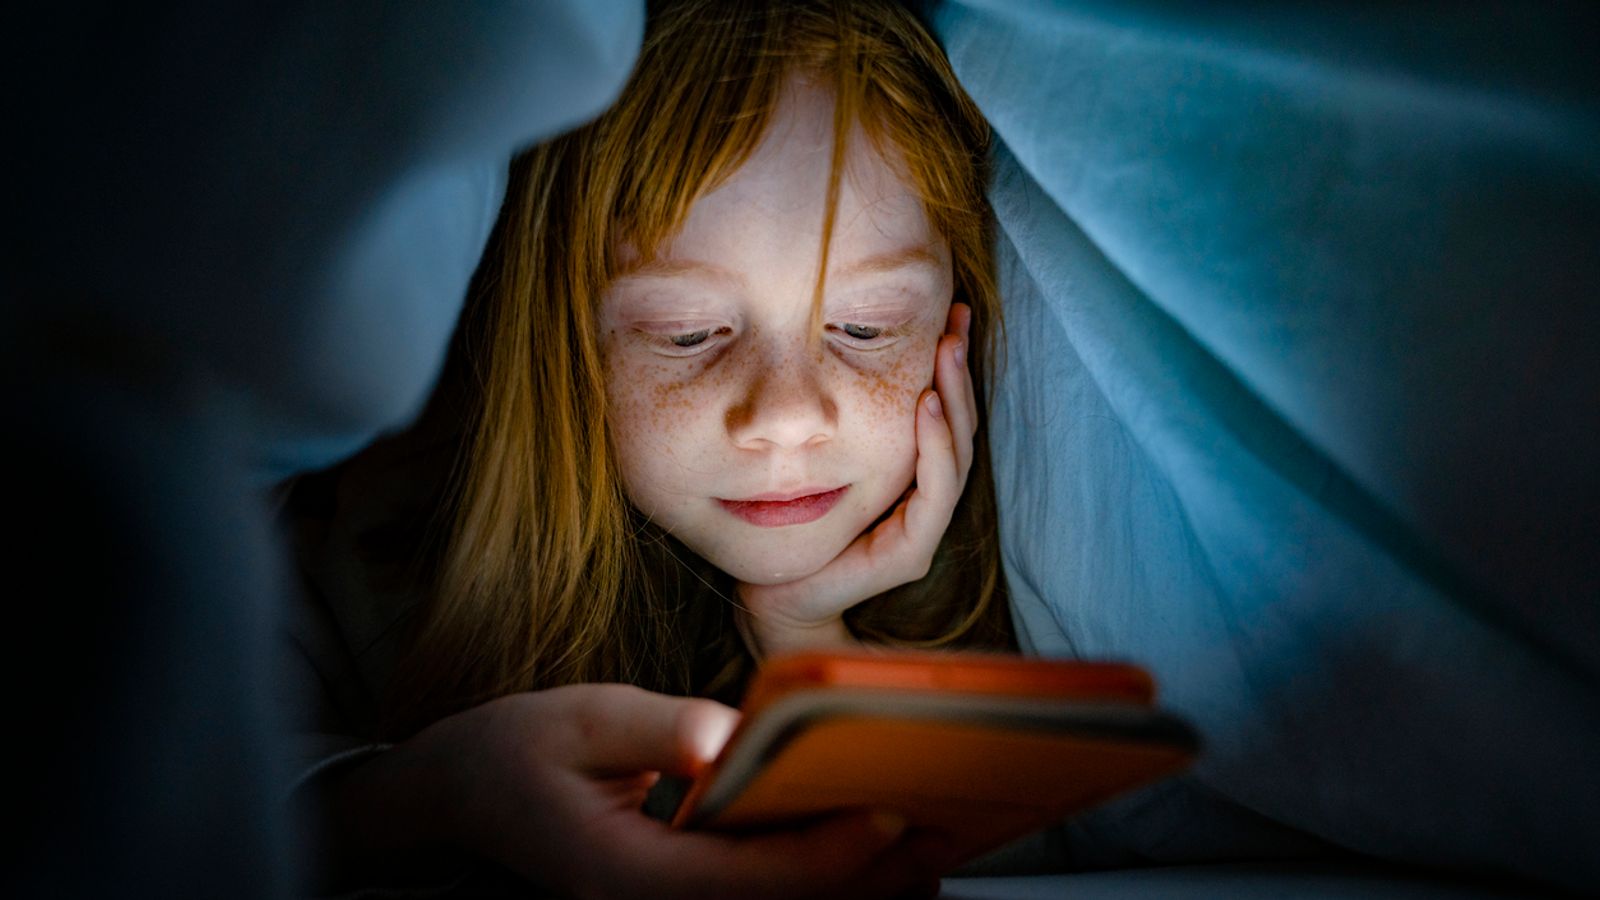 'Split-screening' and other phone habits reveal how children are watching even more videos